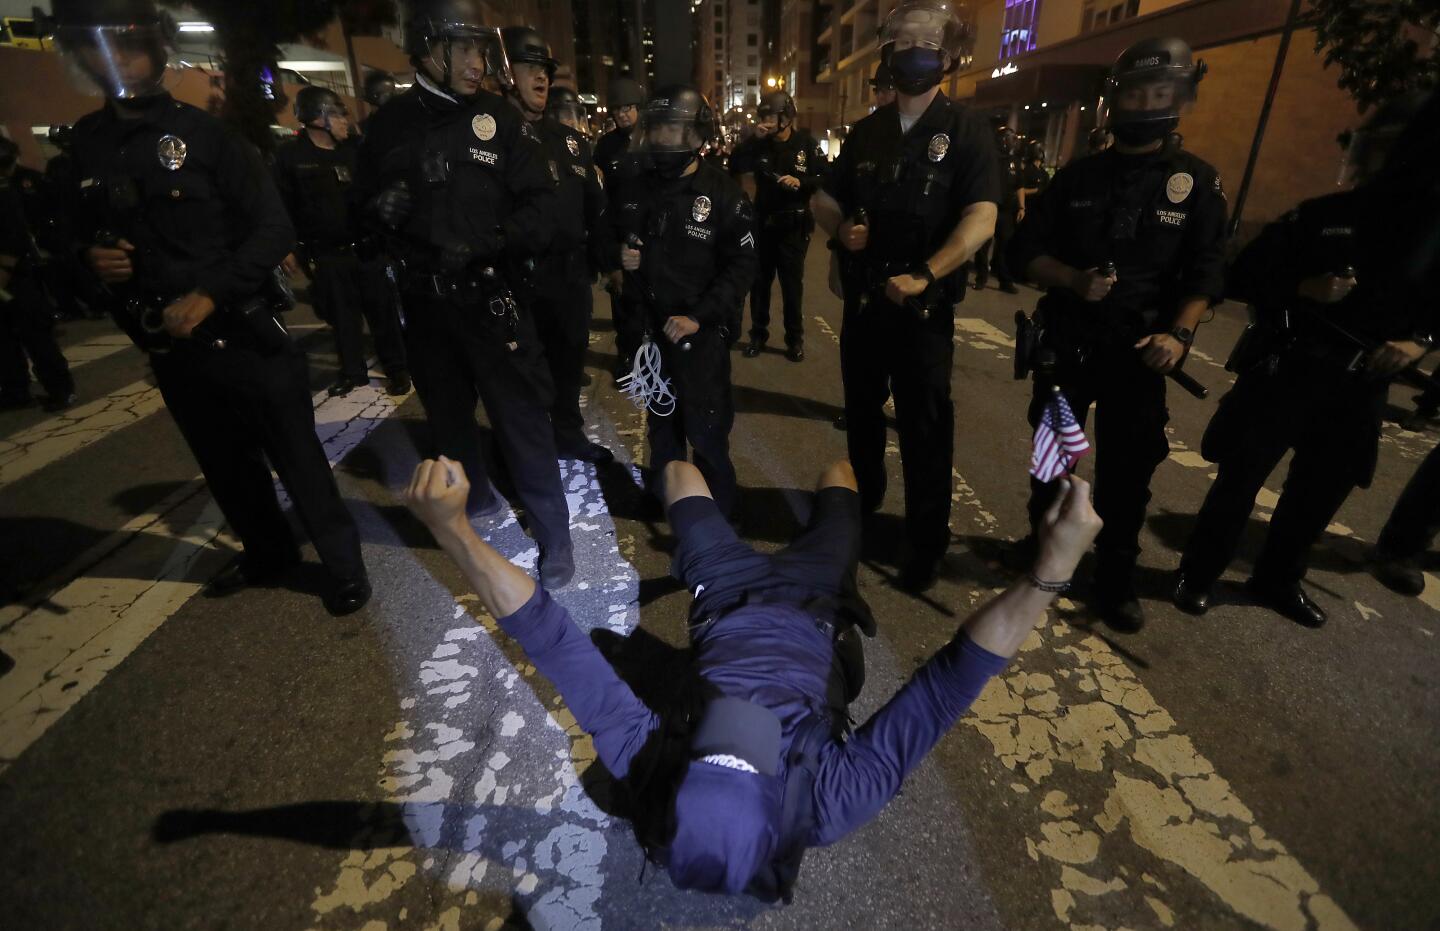 A protester remains defiant after being pushed to the ground by police on Grand Avenue in downtown L.A.